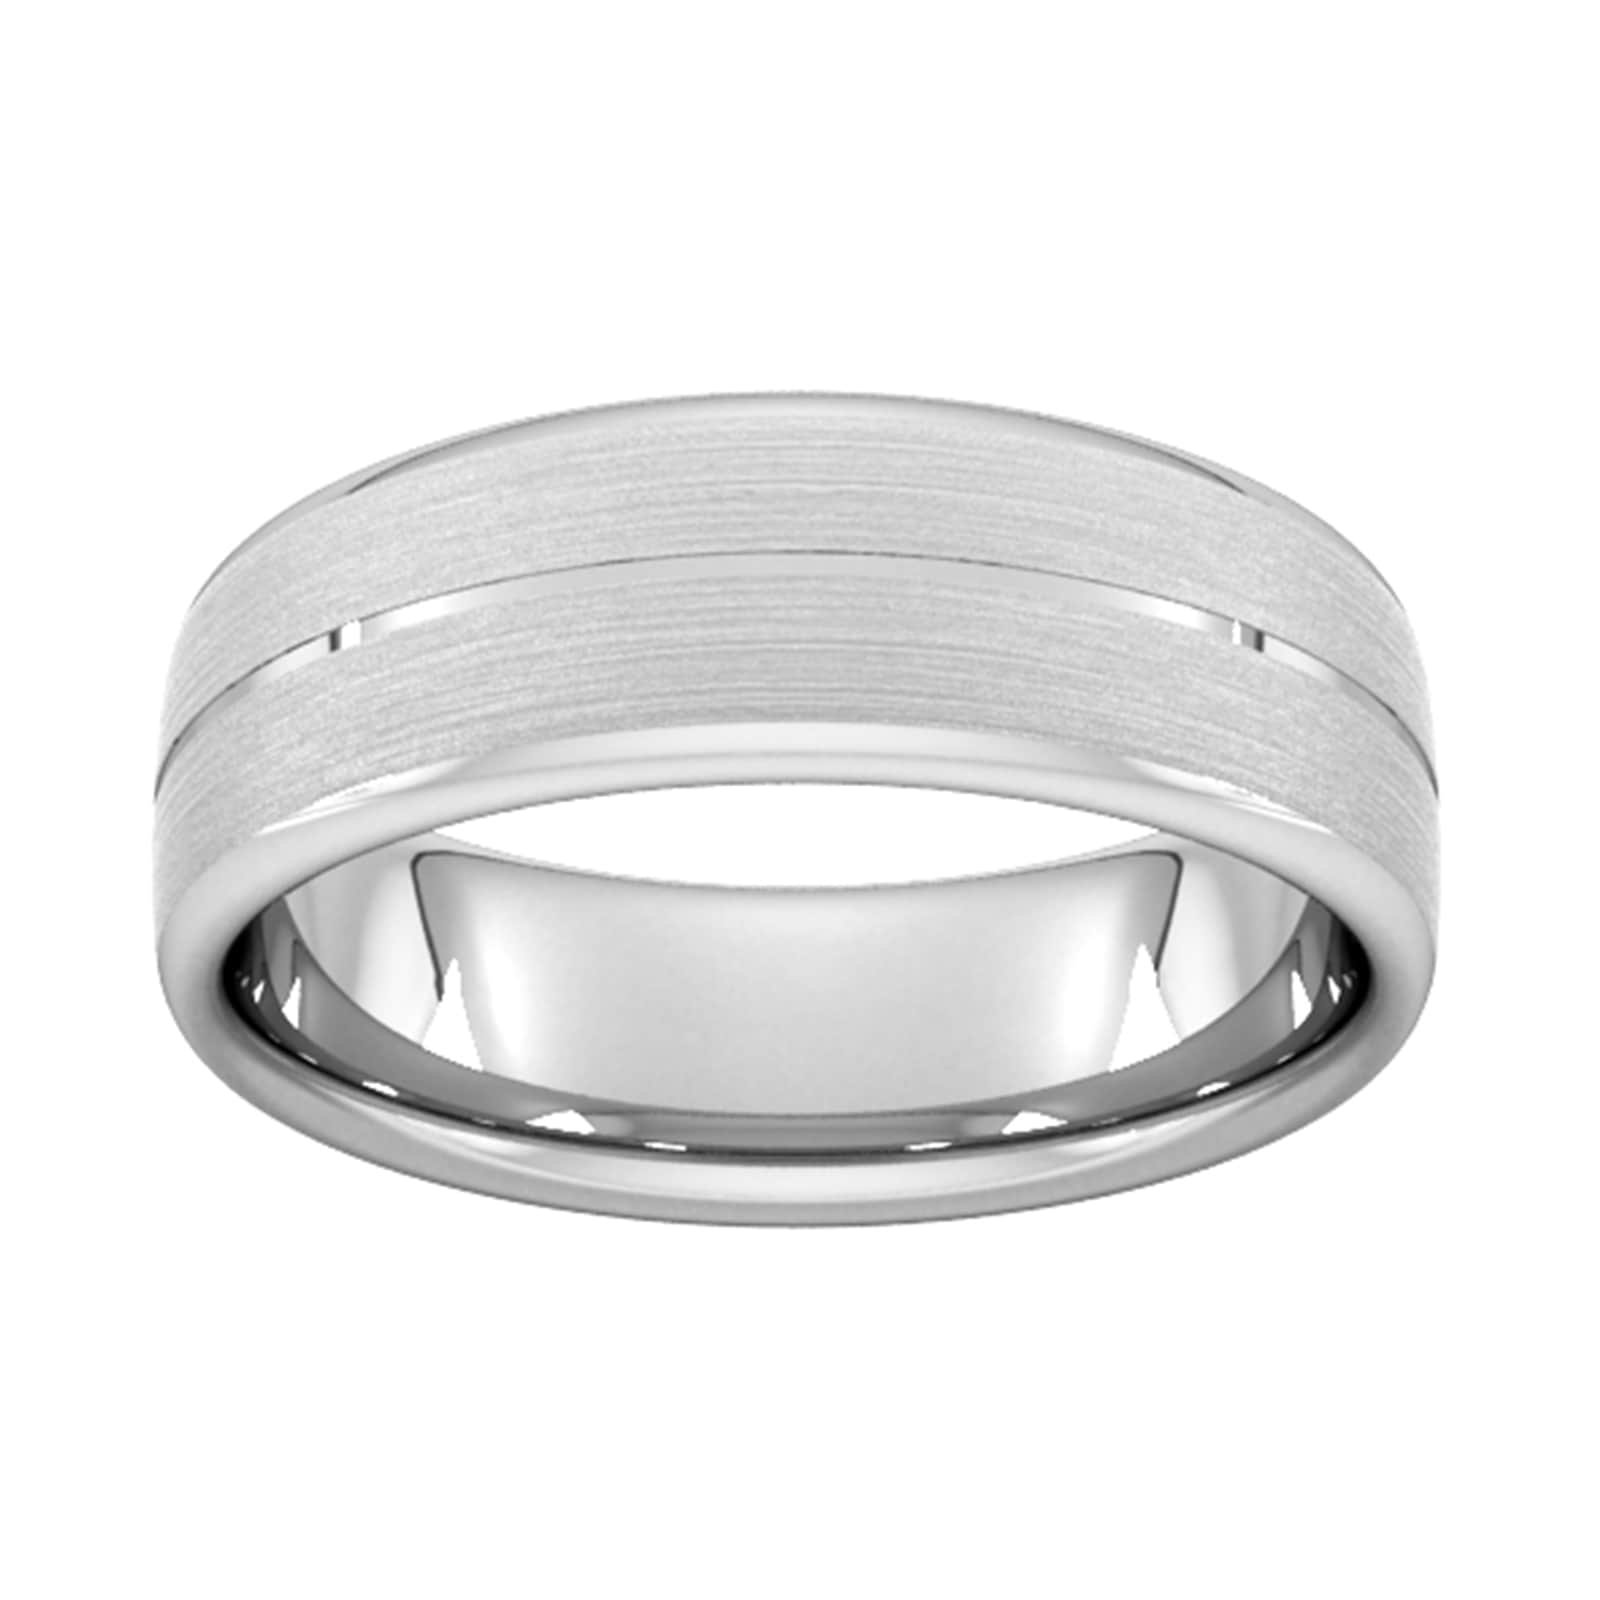 7mm D Shape Standard Centre Groove With Chamfered Edge Wedding Ring In 18 Carat White Gold - Ring Size P